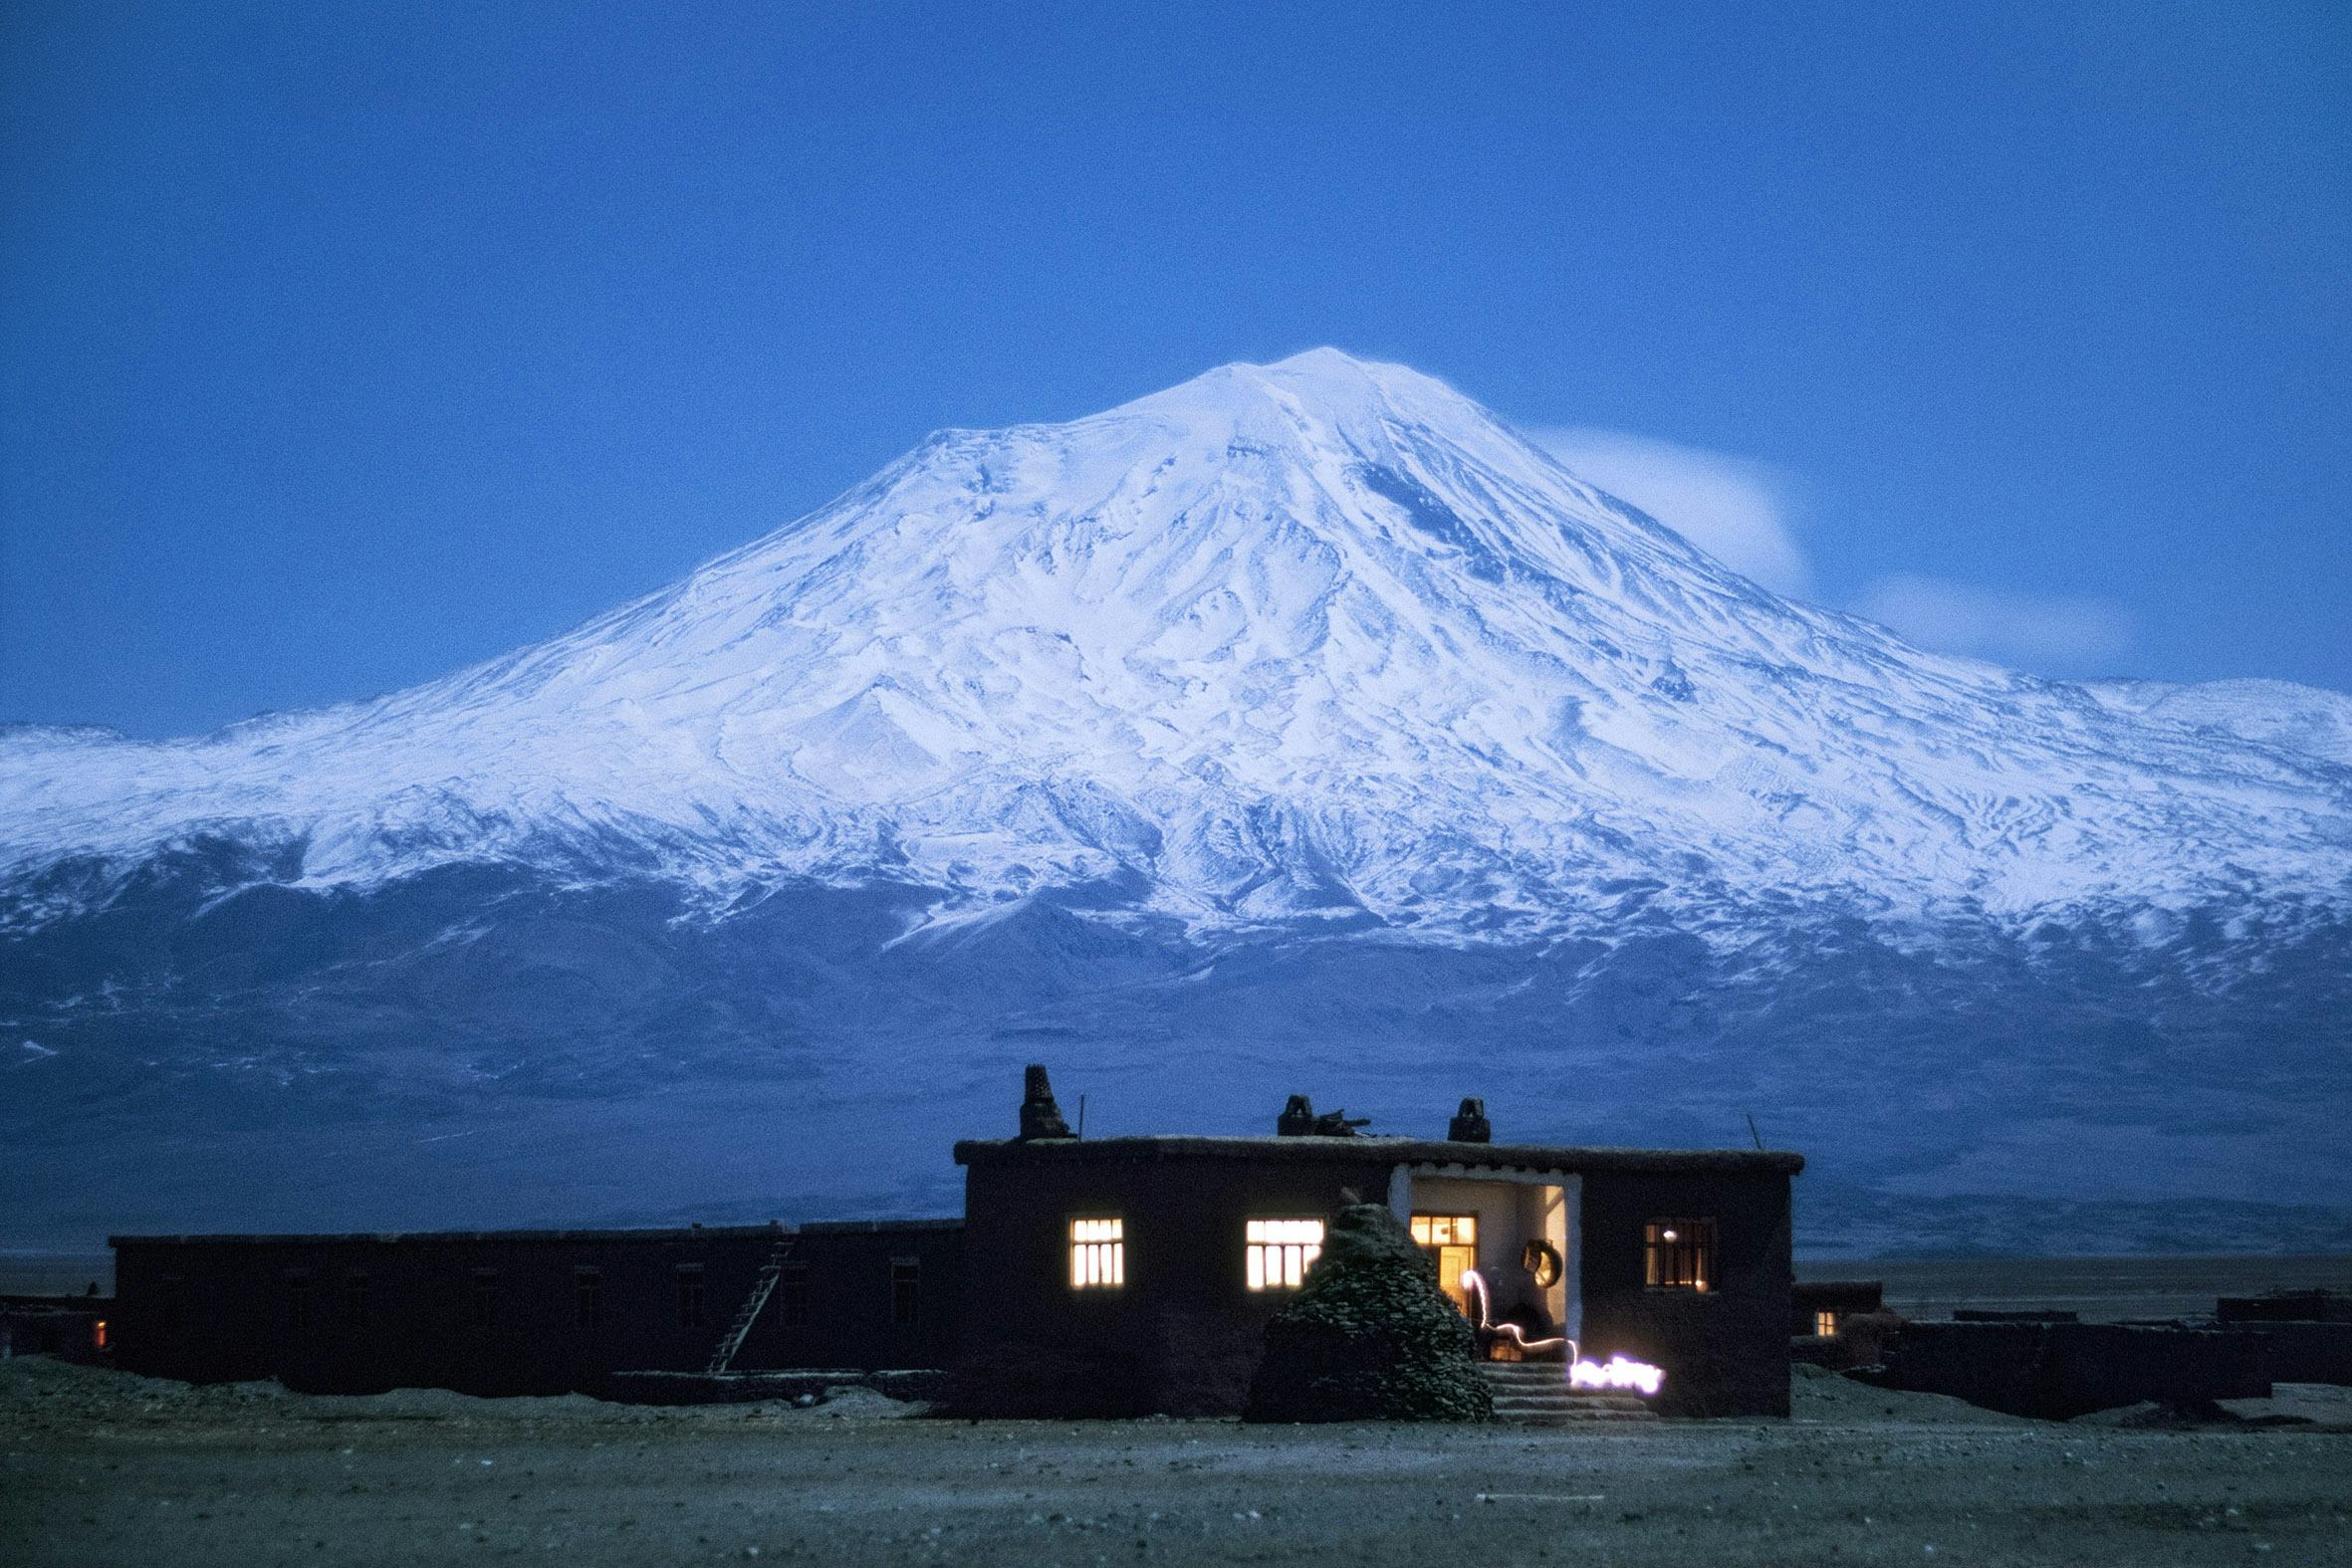 dark house with lights on and snowy mountain in the background